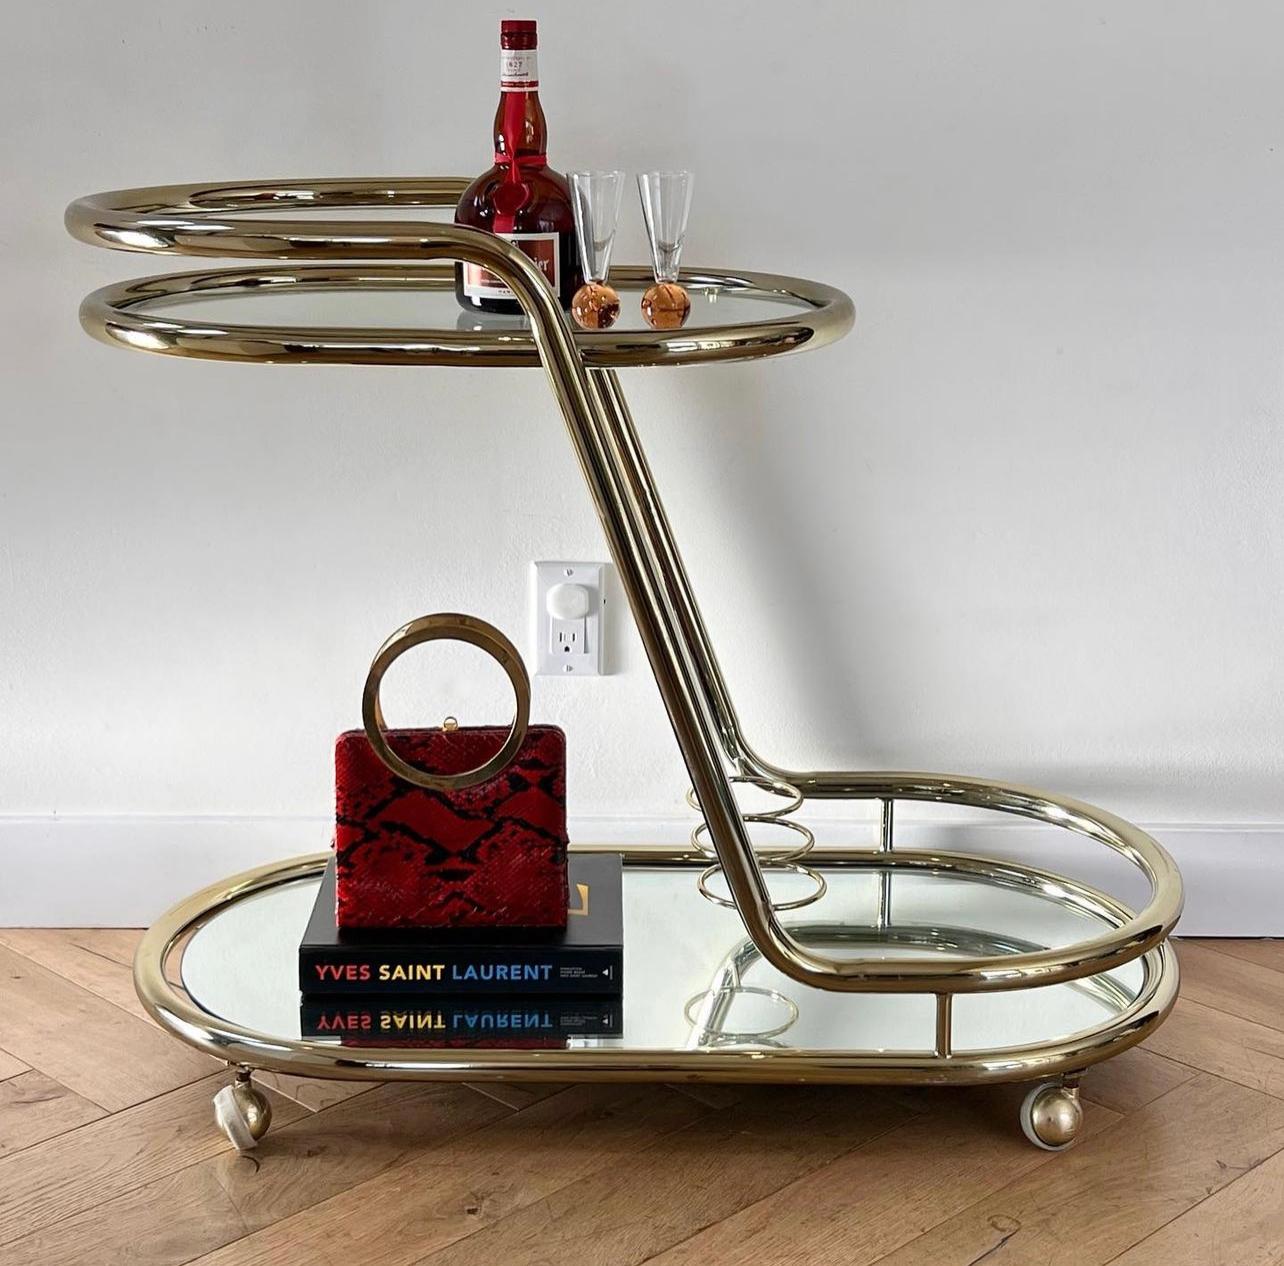 ITALICS: a midcentury two-tier tubular Italian bar cart attributed to Morex, circa 1970s. Featuring a slanted frame in subtly gold plated chrome with glass top and a mirror base, as well as bottle enclaves on the second tier. Both shelves are